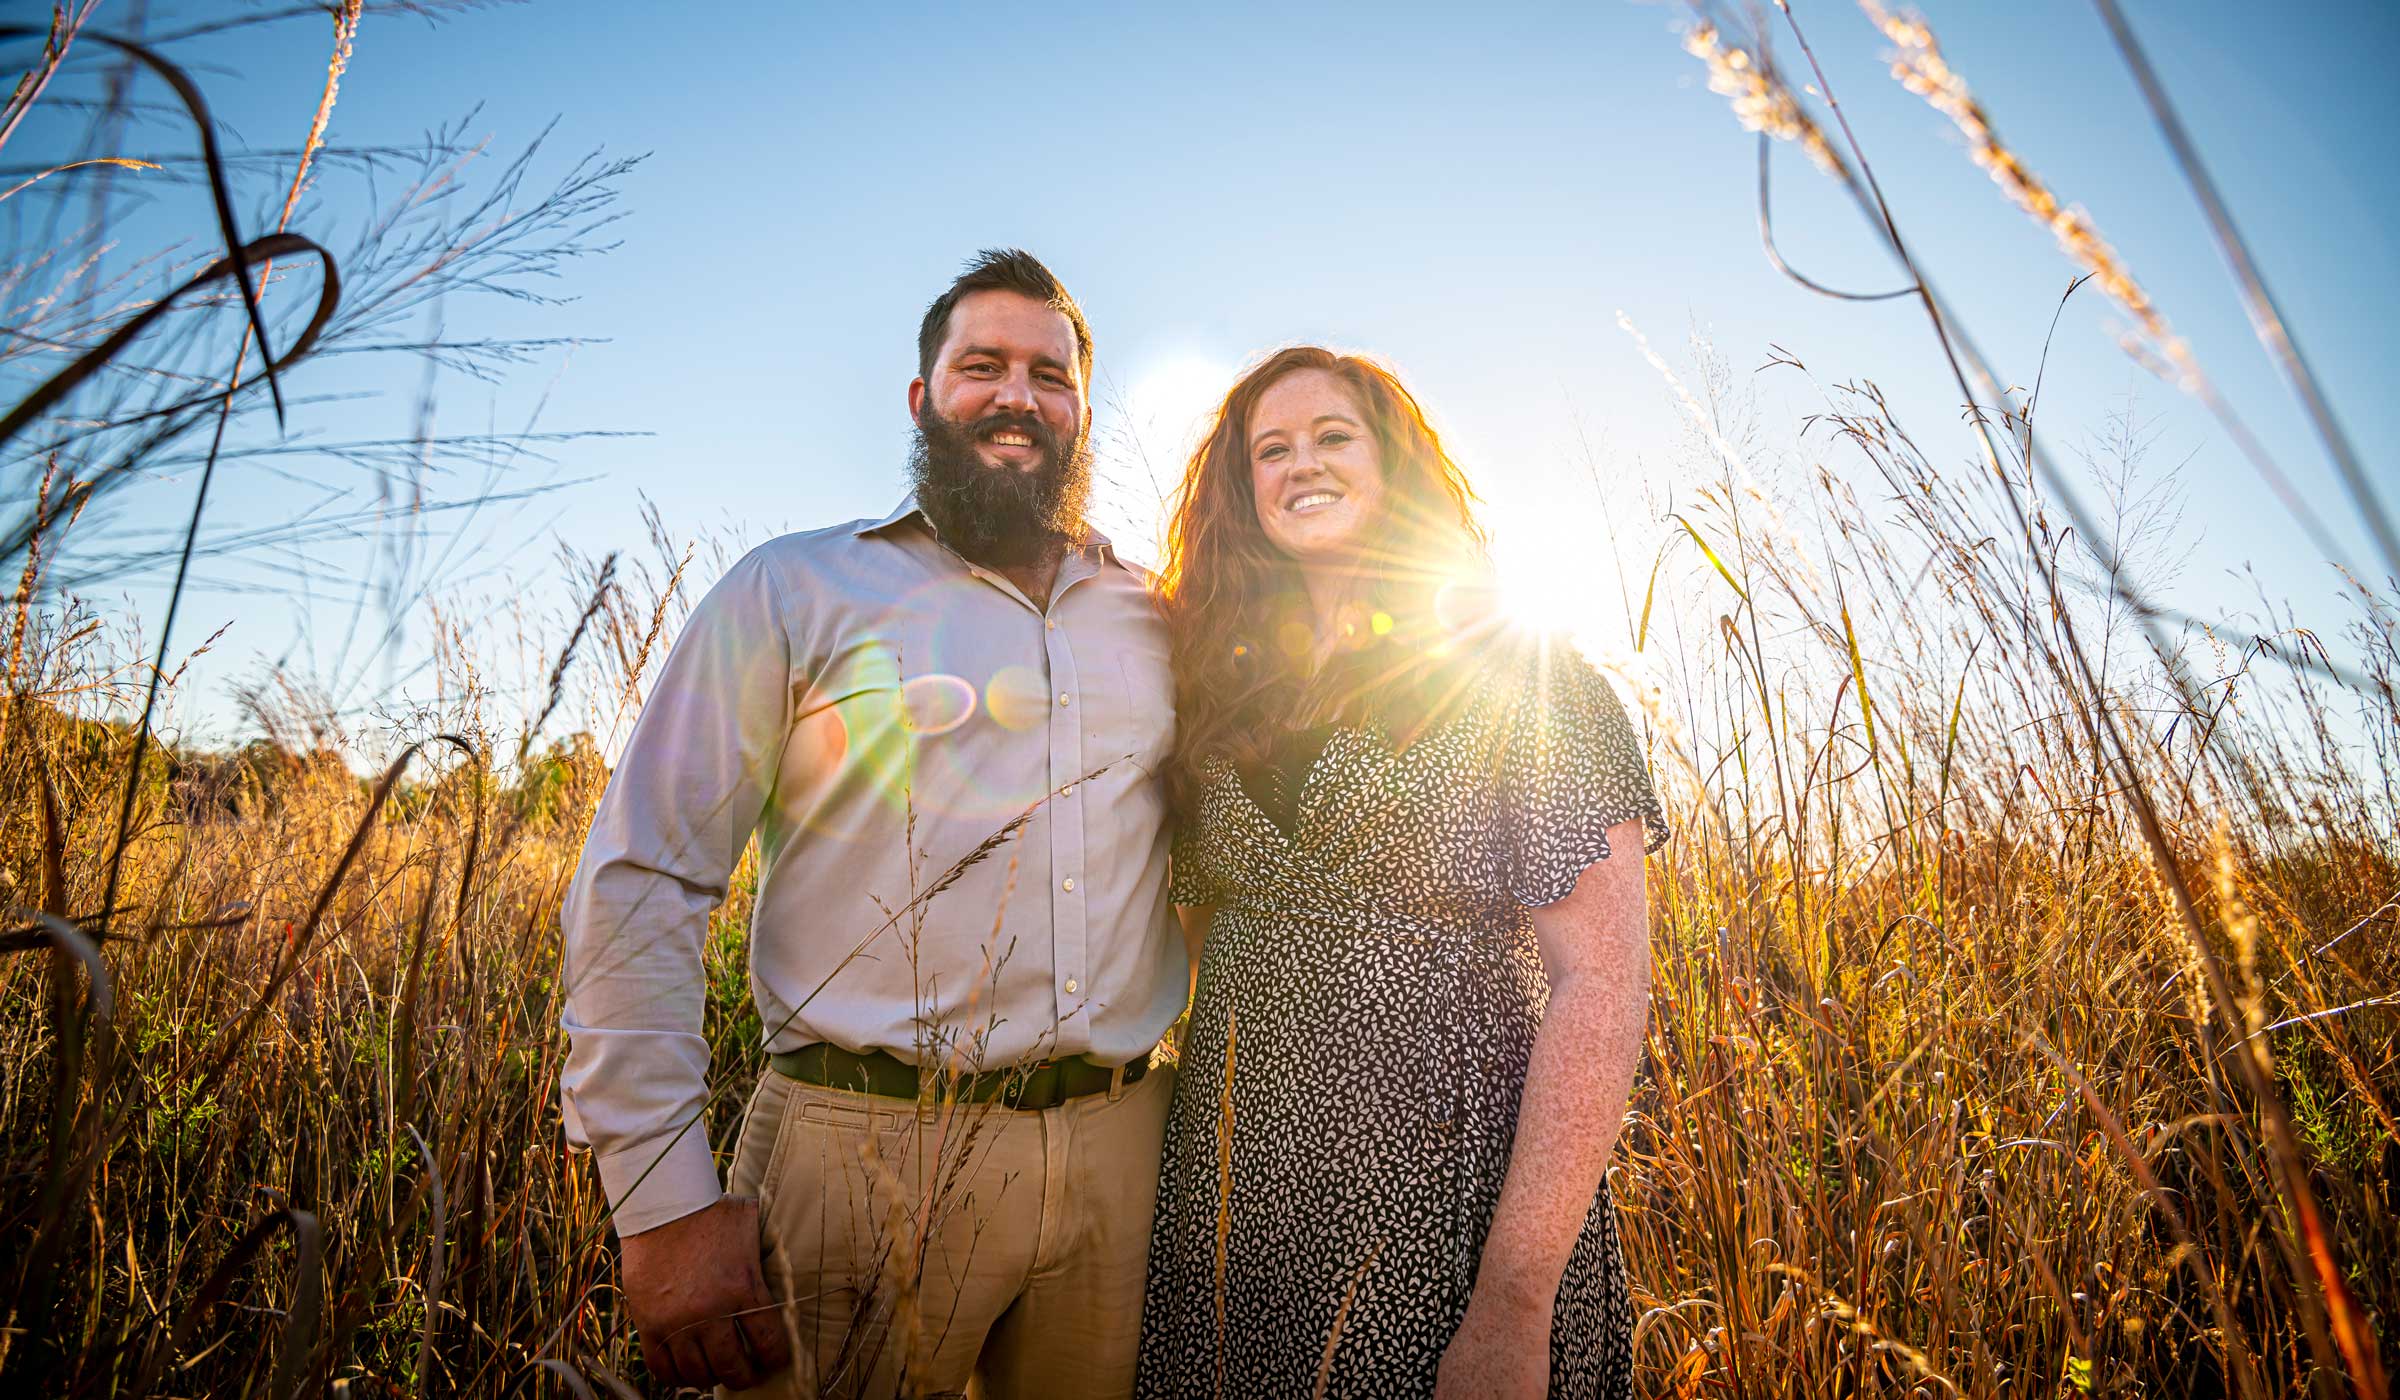 Jesse and Carley Morrison, pictured in a sunny field.